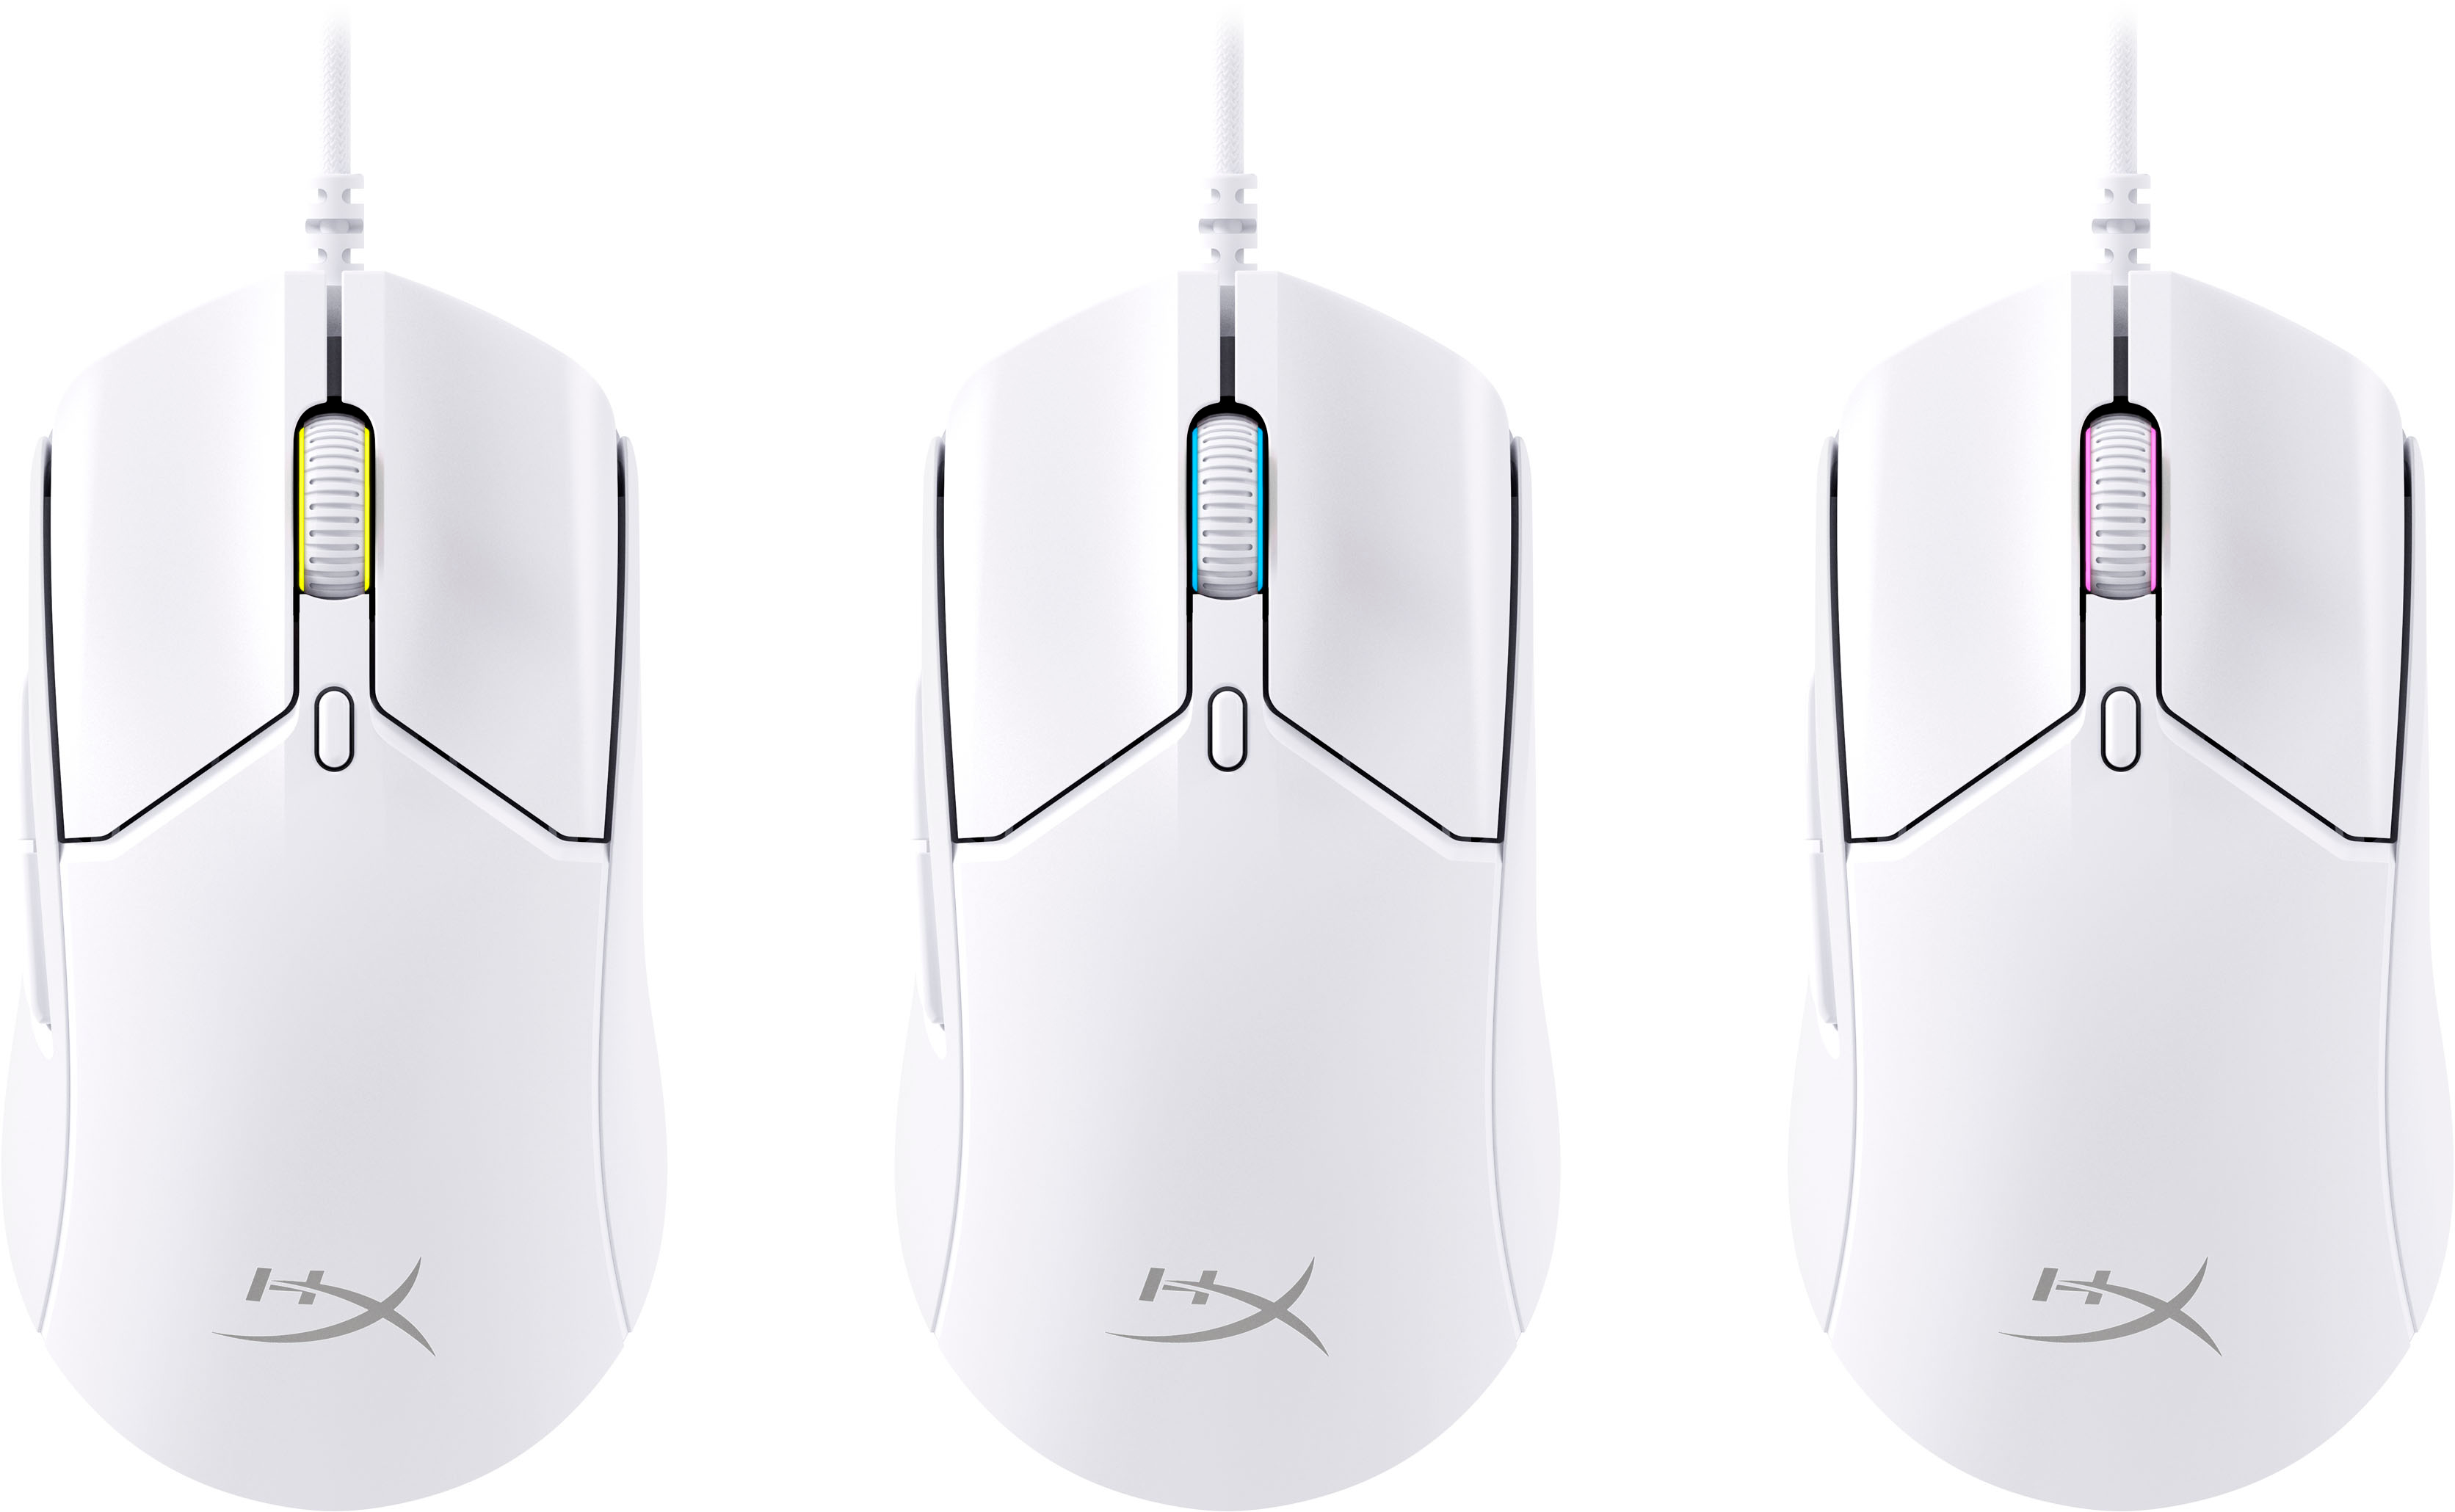 HyperX Pulsefire Haste 2 Lightweight Gaming Best White with RGB Lighting 6N0A8AA - Wired Optical Buy Mouse